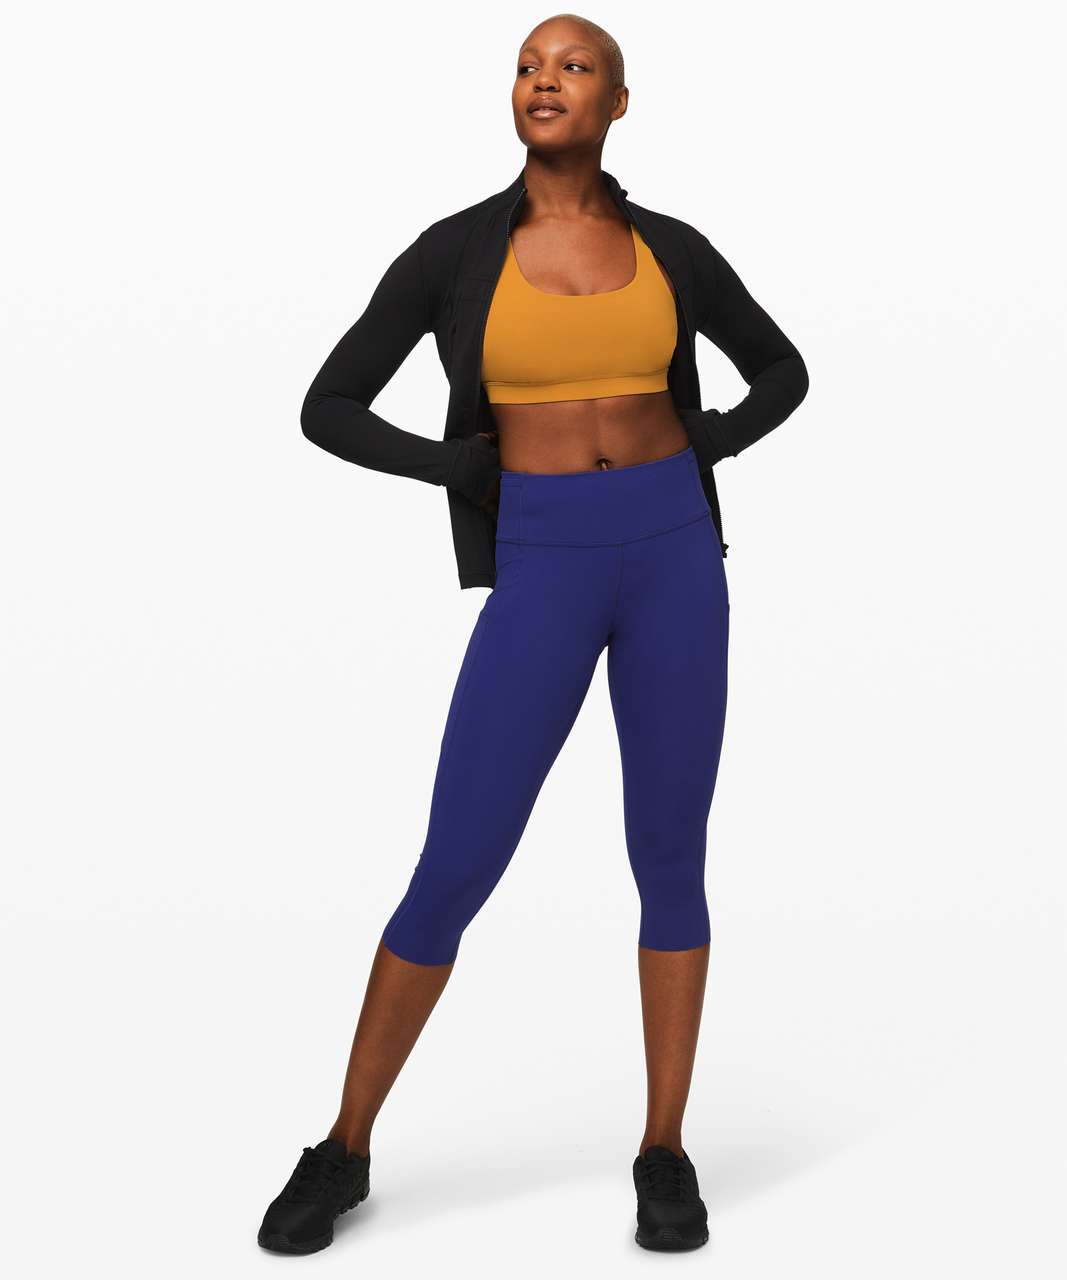 lululemon - The run crop of the summer, just dropped in new colours. Feel  fast and free in these barely there, sweat-wicking run crops. Made with  Nulux™ fabric that is quick-drying, sweat-wicking